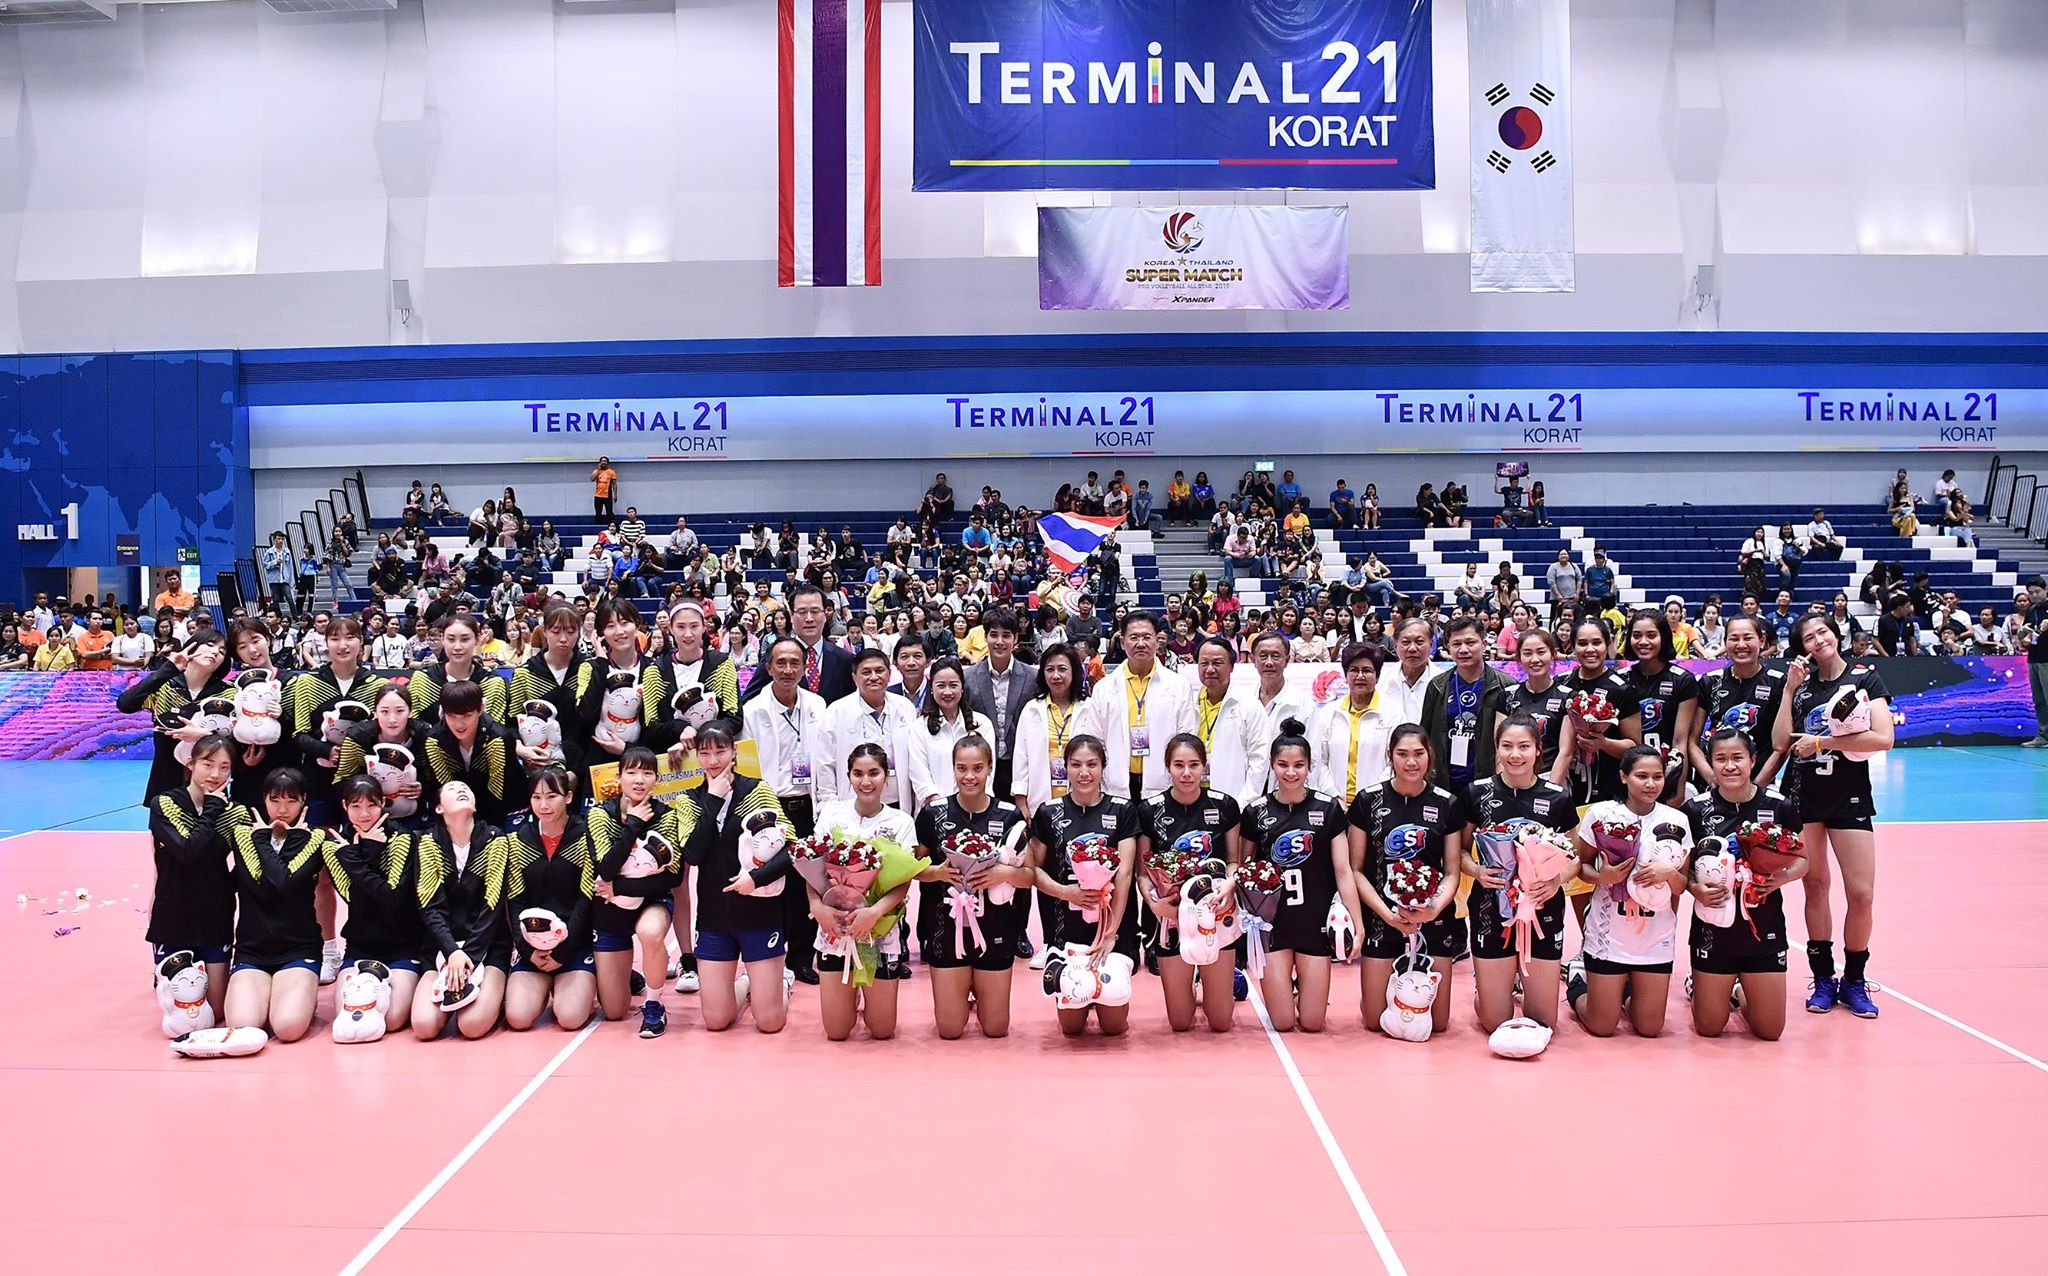 HOSTS THAILAND BEAT KOREA IN NAIL-BITING FIVE-SETTER TO WIN FIRST GAME AT ALL-STAR SUPER MATCH